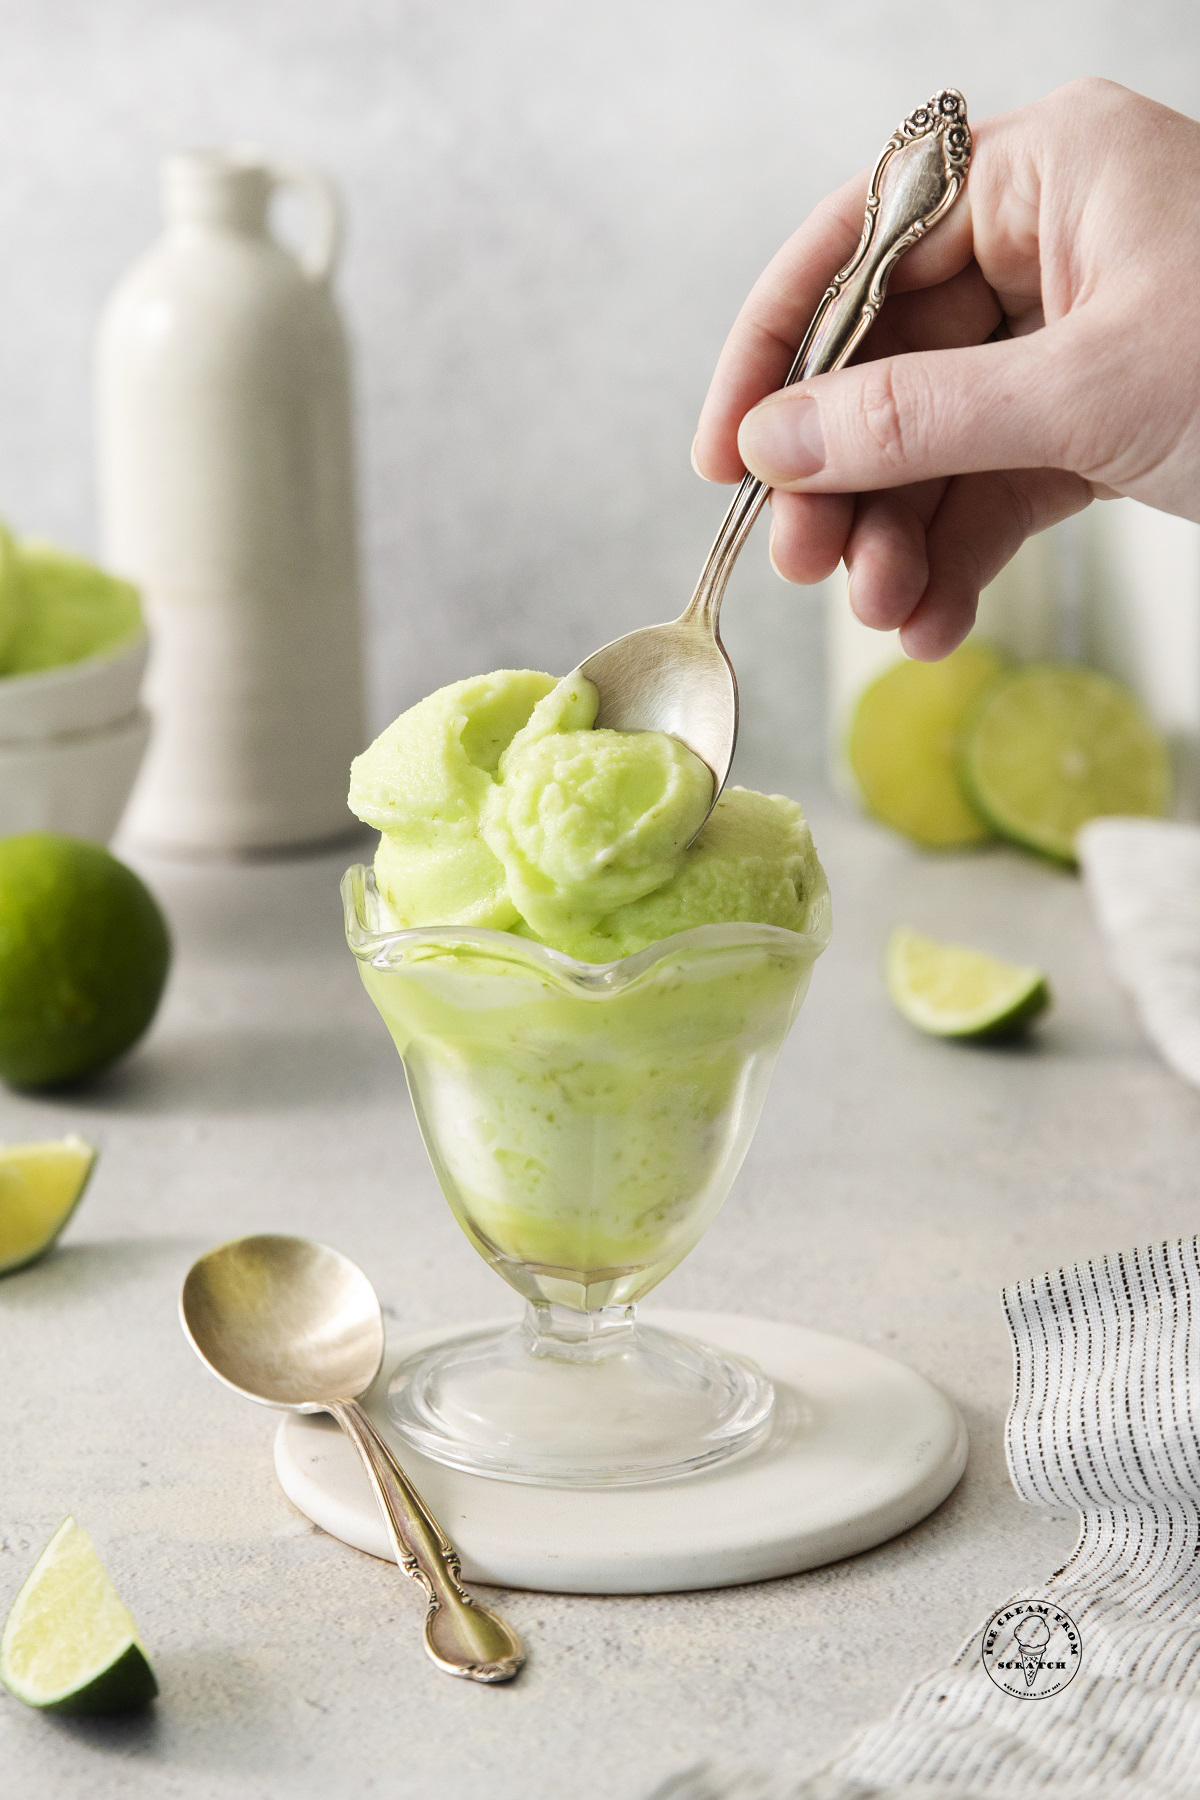 a hand holding a spoon and eating from a glass sundae glass filled with lime sherbet.